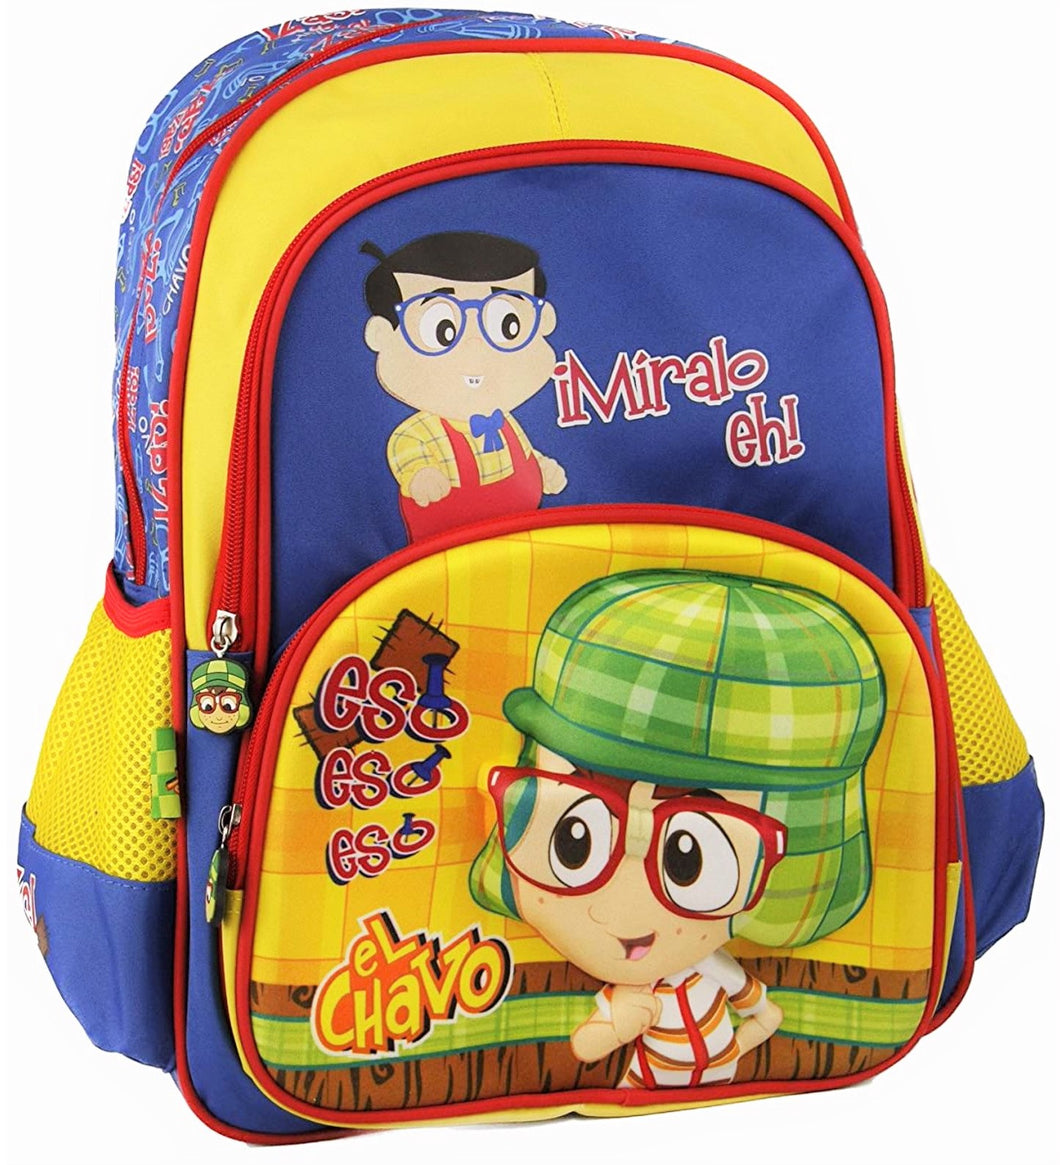 El Chavo Backpack Large 16 inch iMiralo eh!